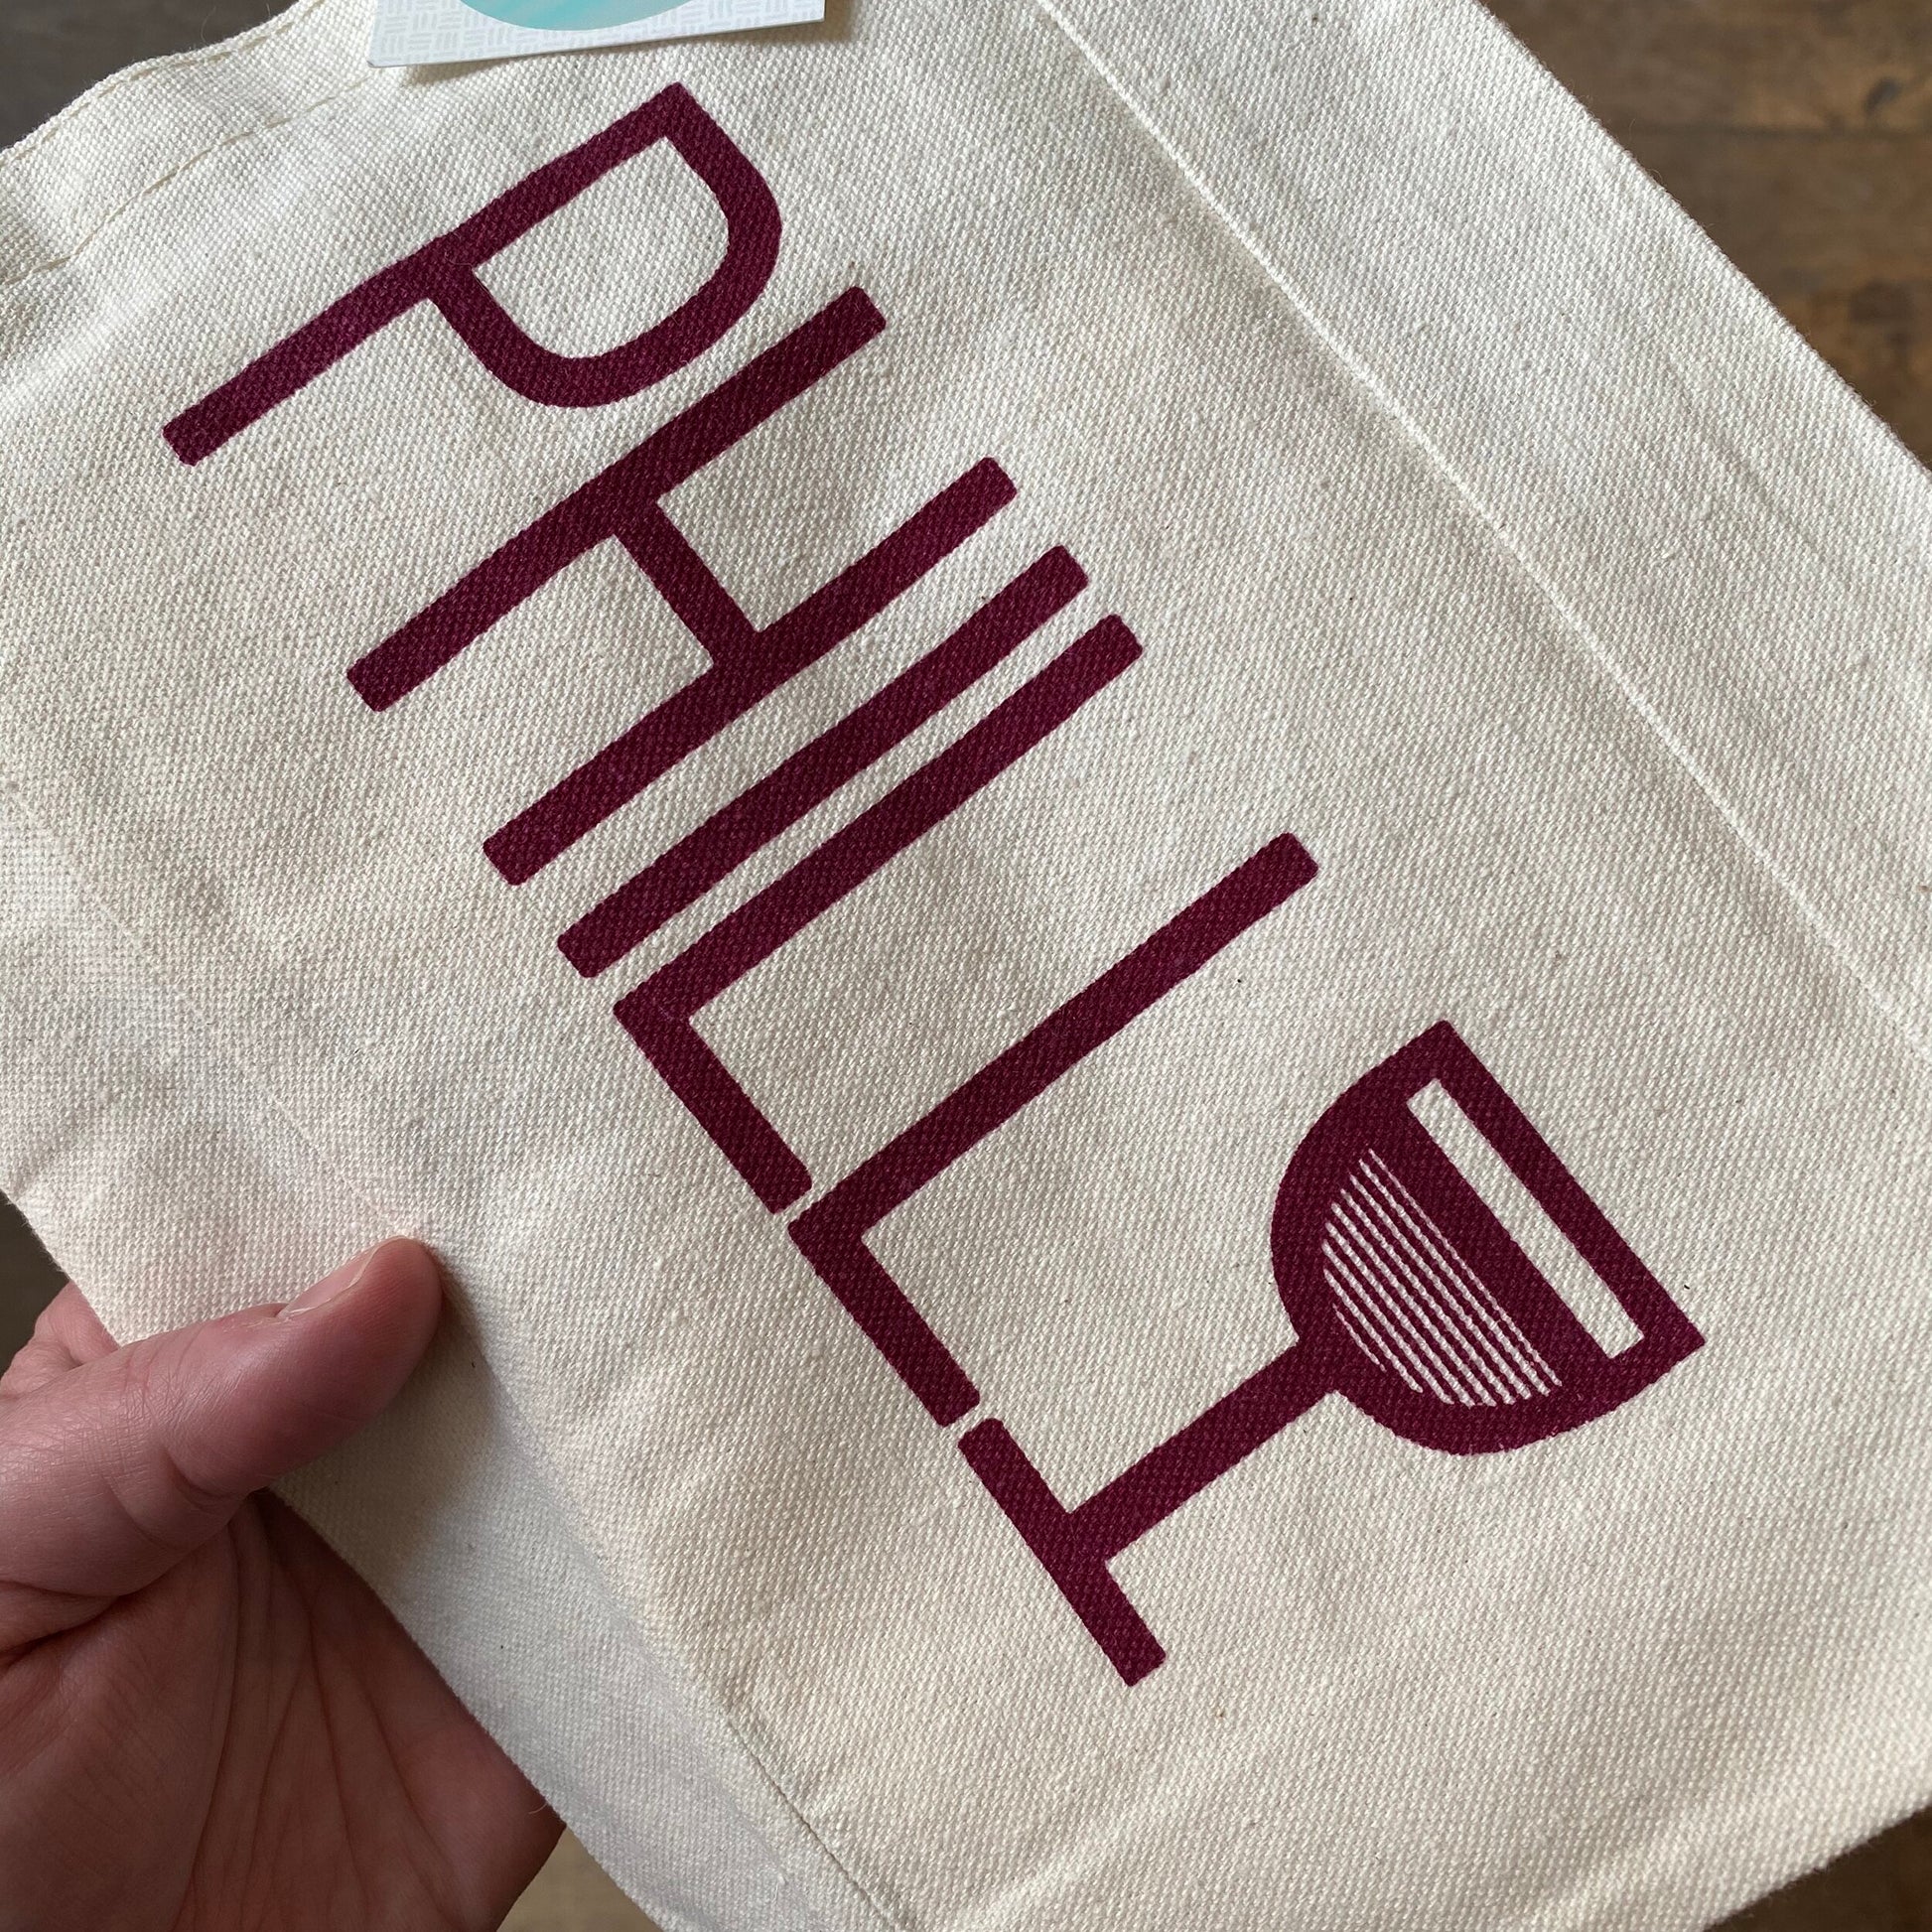 A hand-screenprinted canvas tote bag with the word "Philly" printed on it along with an illustration of a wine glass, called the "Philly Wine Tote" by exit343design.